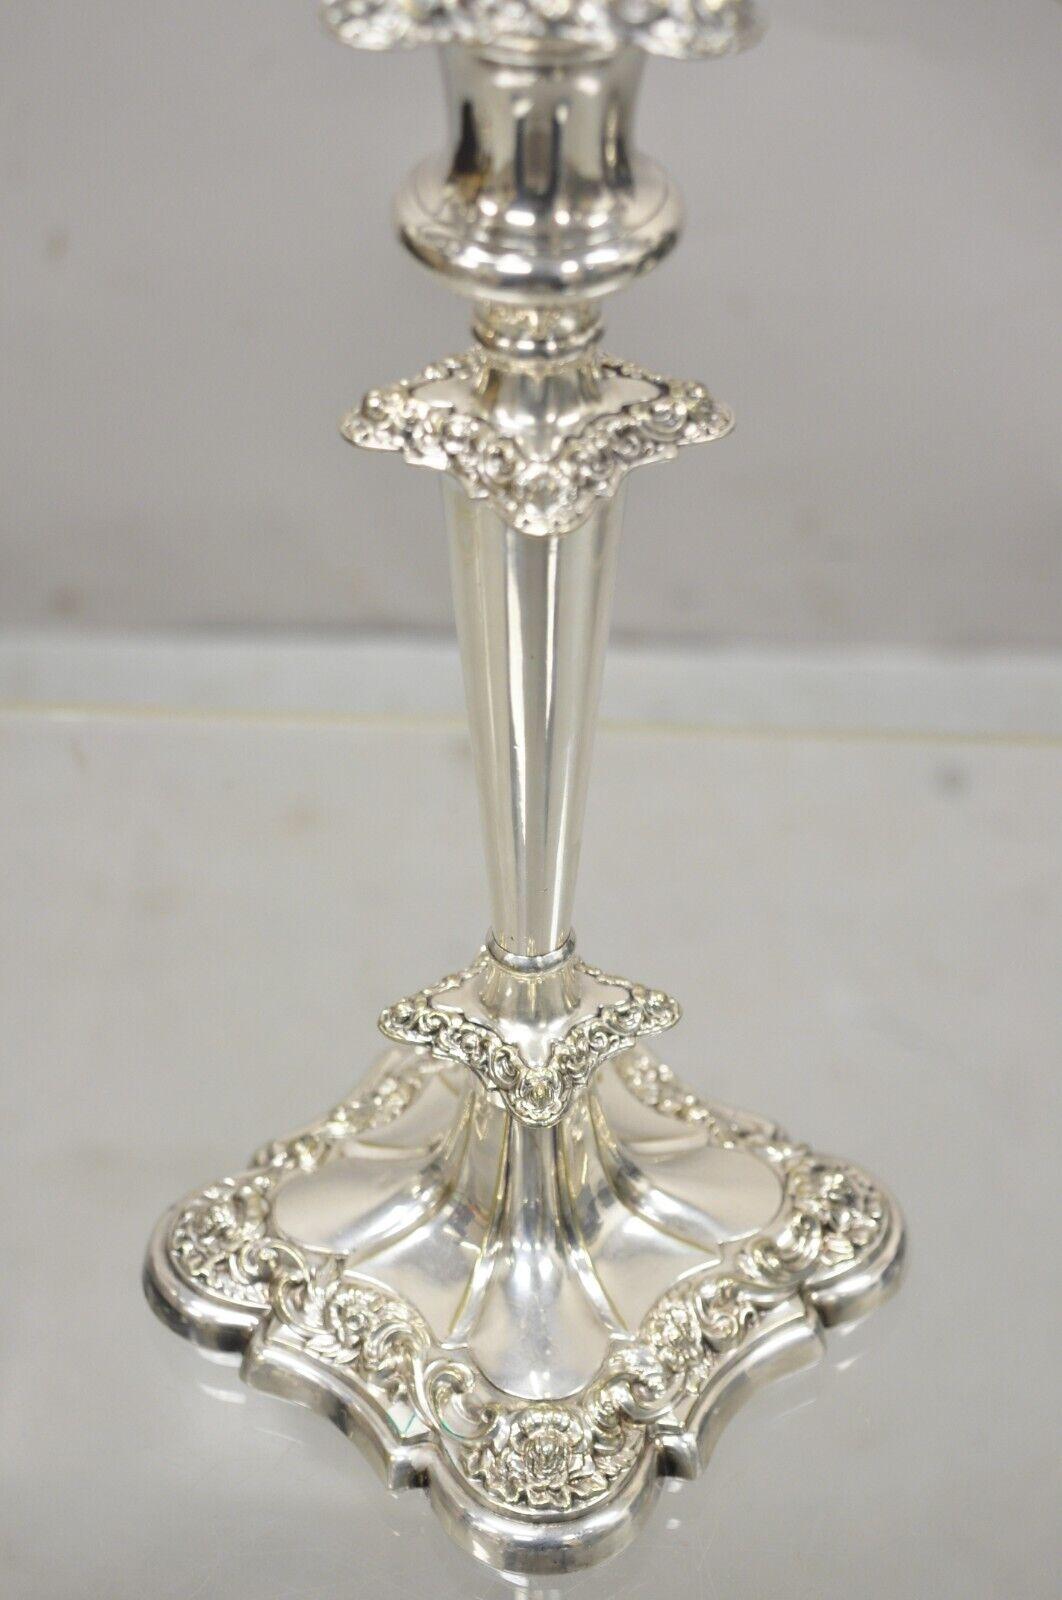 Antique Gorham Floral Repousse Twin Arm Silver Plated Candlestick Candelabra In Good Condition For Sale In Philadelphia, PA